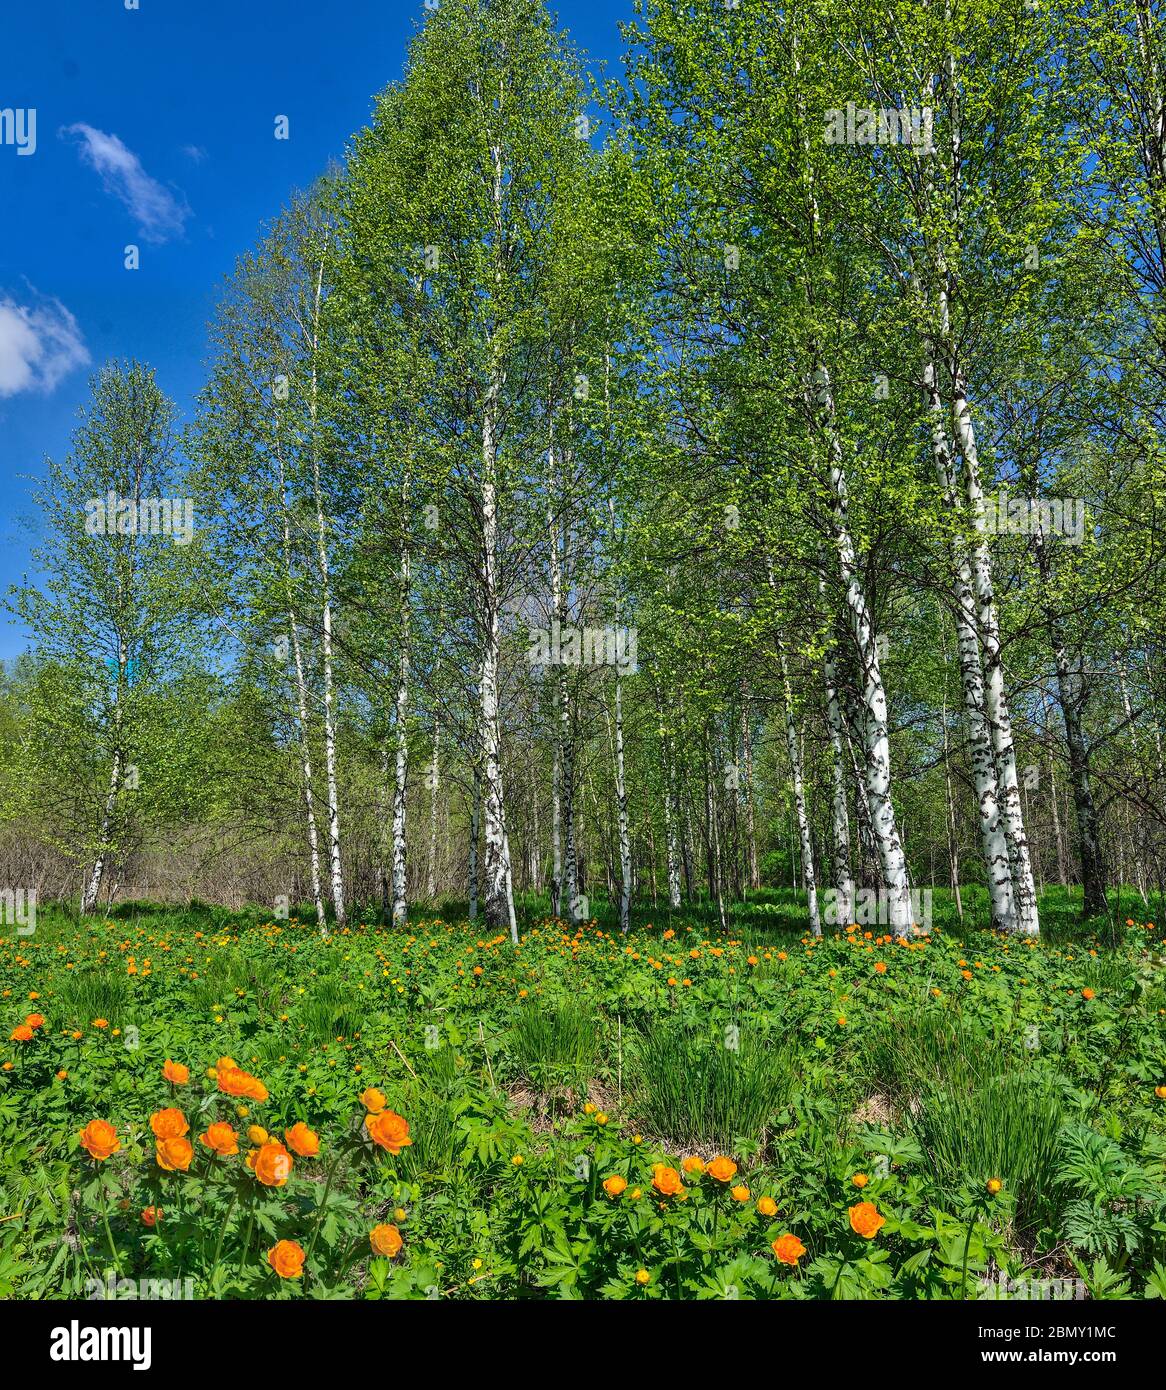 Flowering glade of orange trollius asiaticus or globe-flowers in spring  birch forest. Bright sunny spring landscape with beautiful blossoming wild fl Stock Photo